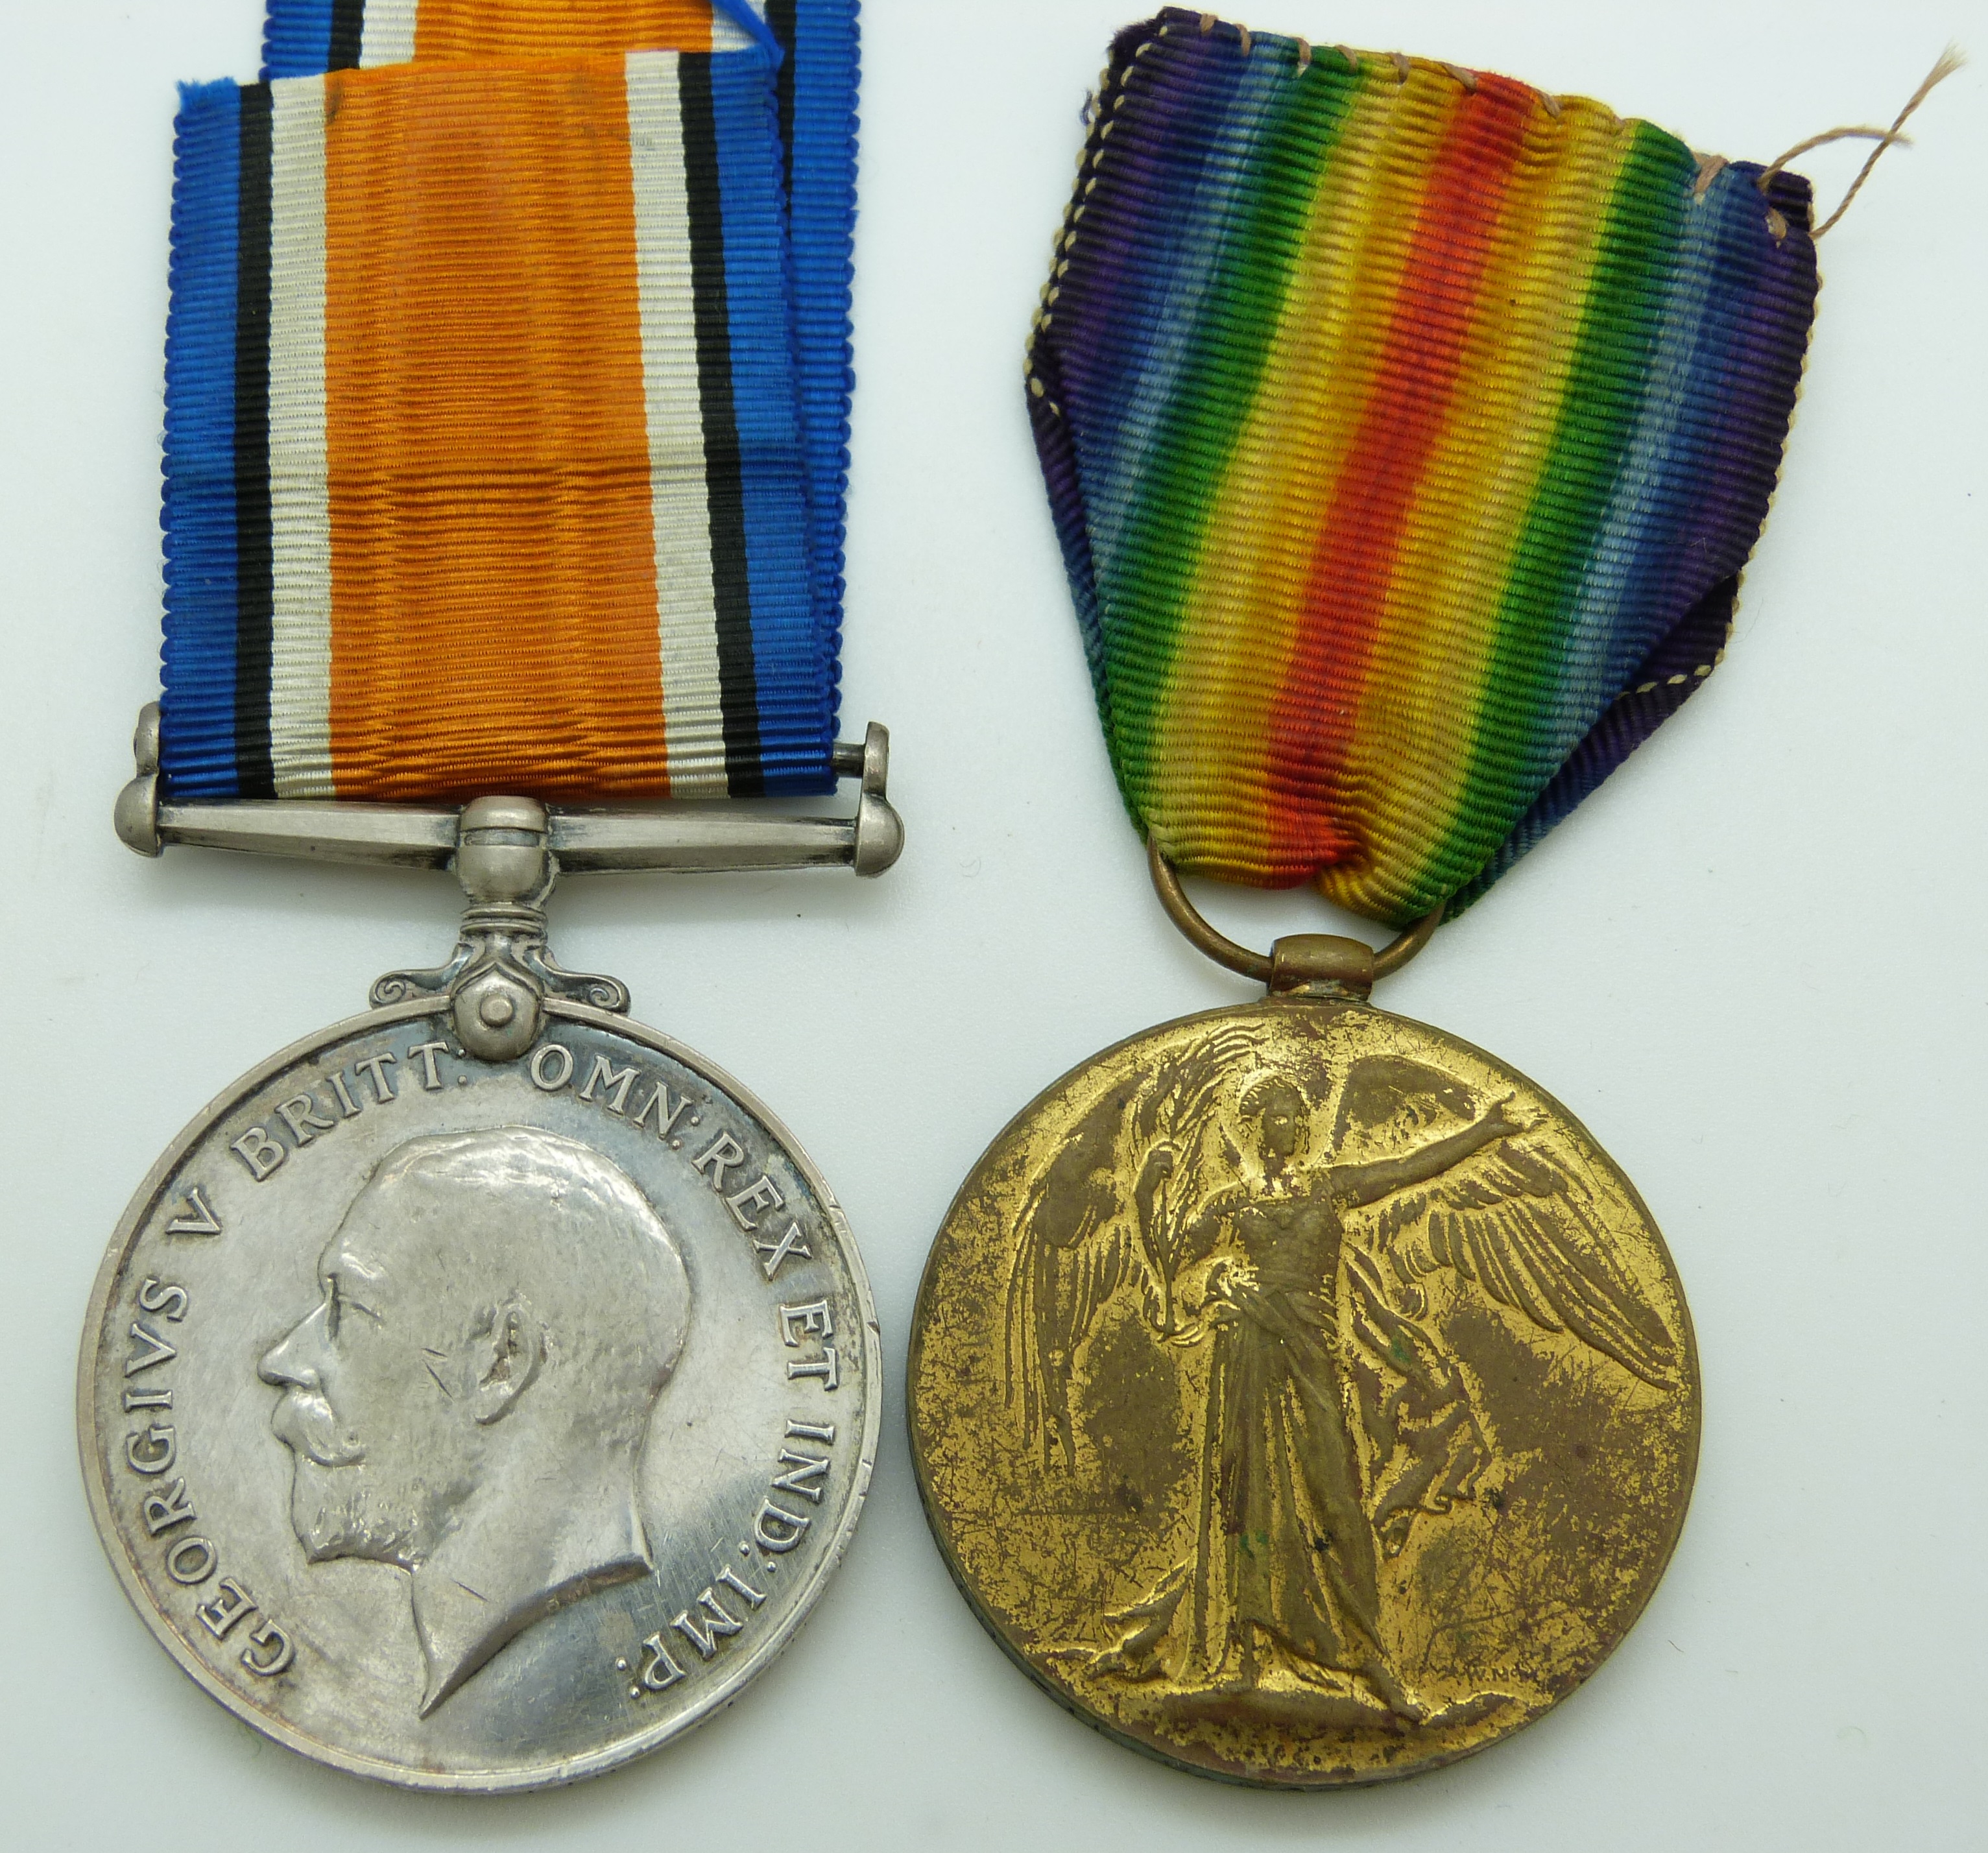 British Army WWI medals comprising War Medal and Victory Medal named to 26259 Pte G Martin, - Image 2 of 3